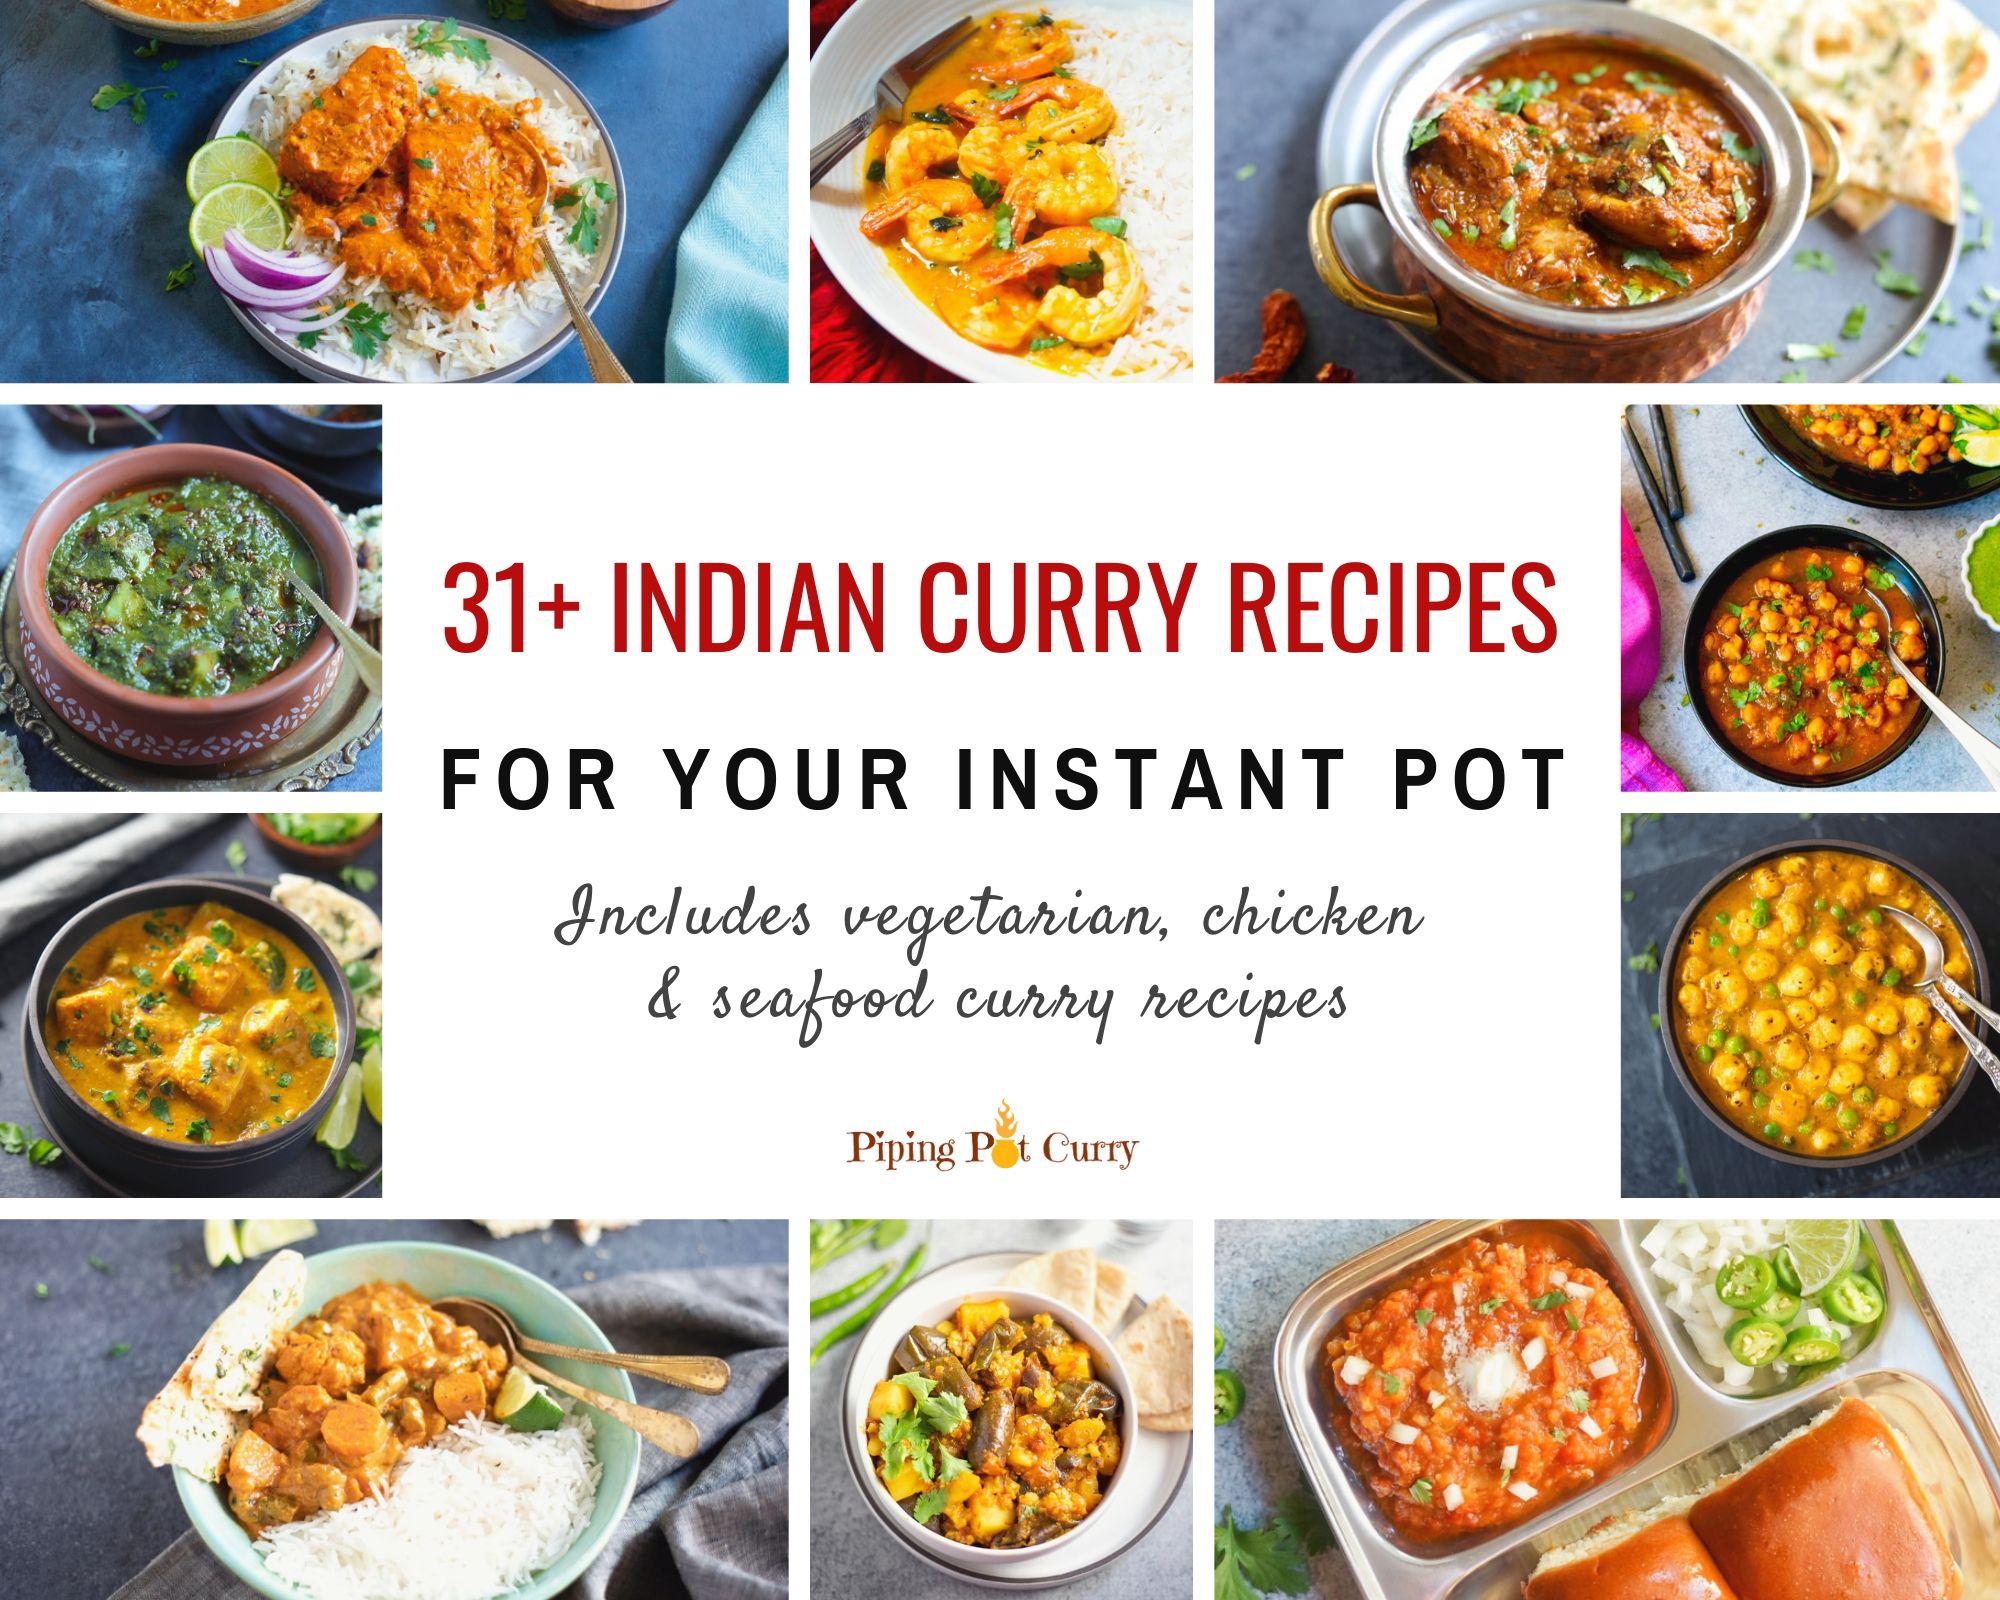 Indian Thanksgiving Recipes (+Dinner Menu) - Piping Pot Curry